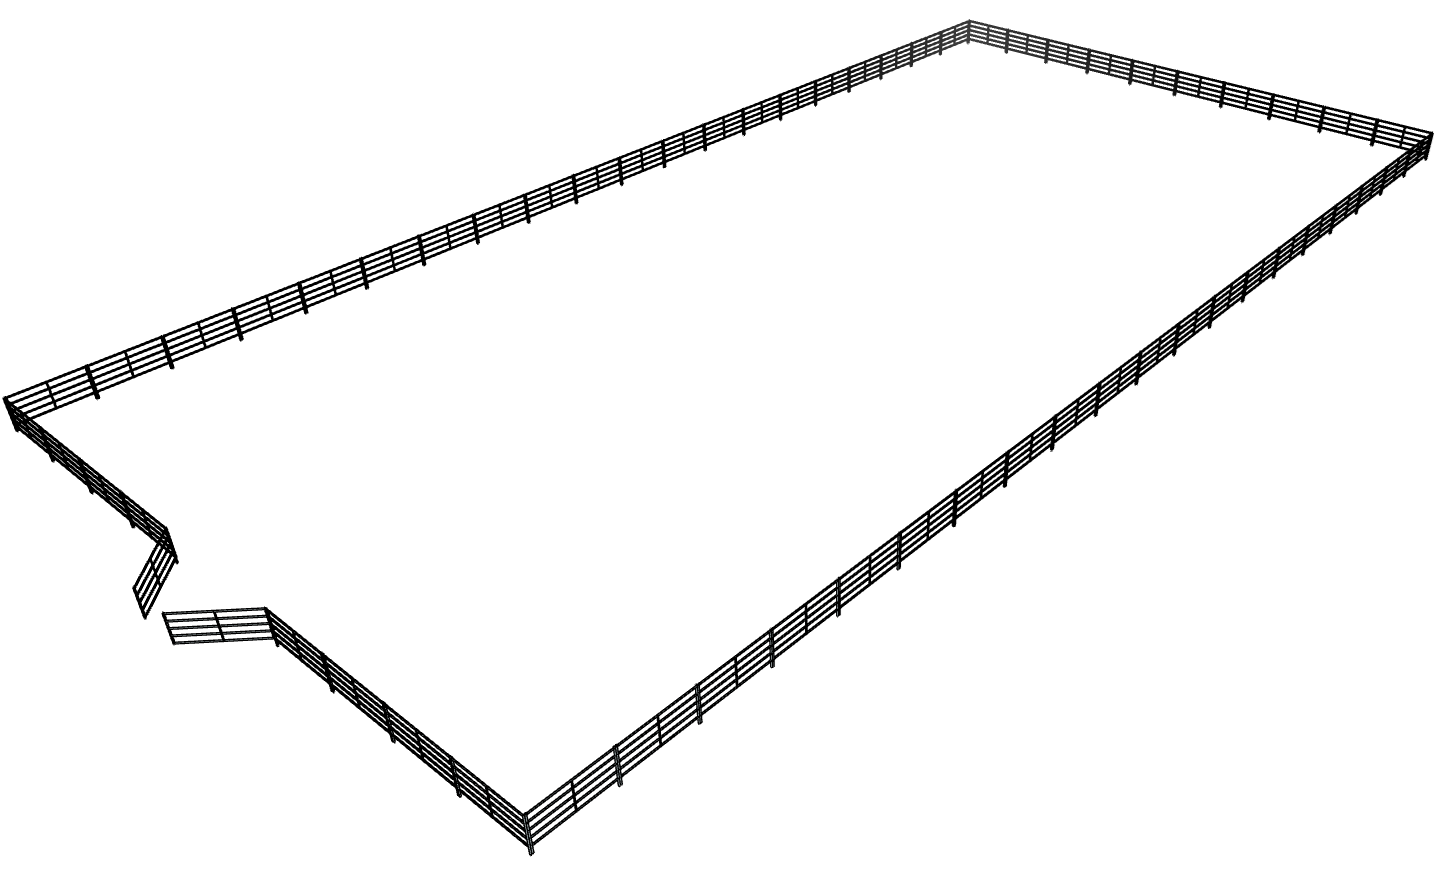 Galvanized 100 Foot by 200 Foot 5-Rail Riding Arena